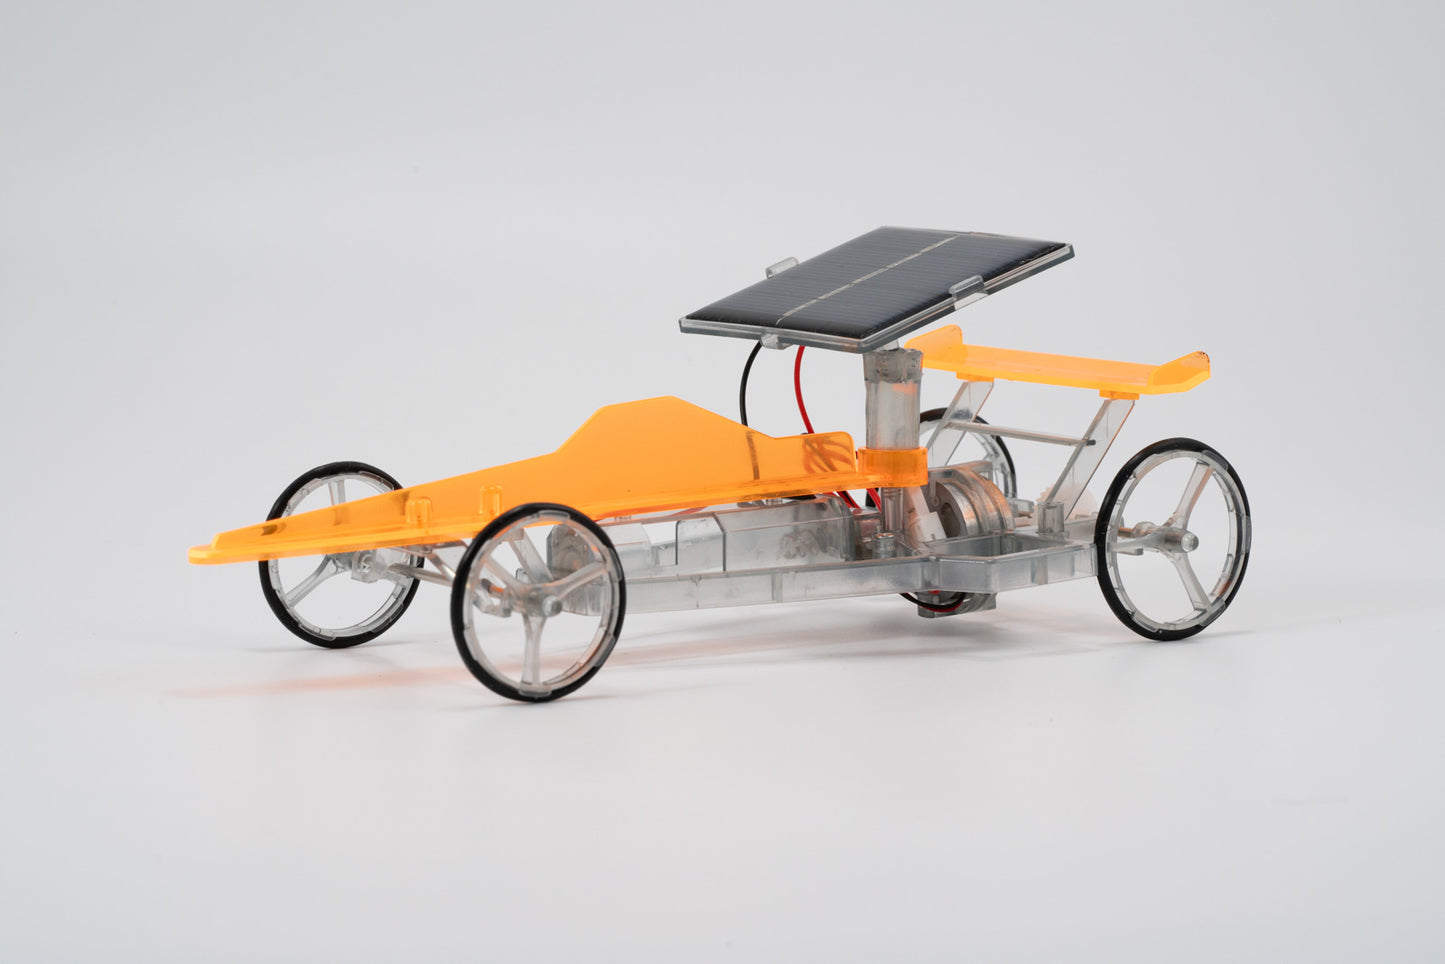 Solar/Battery Top Fuel Dragster